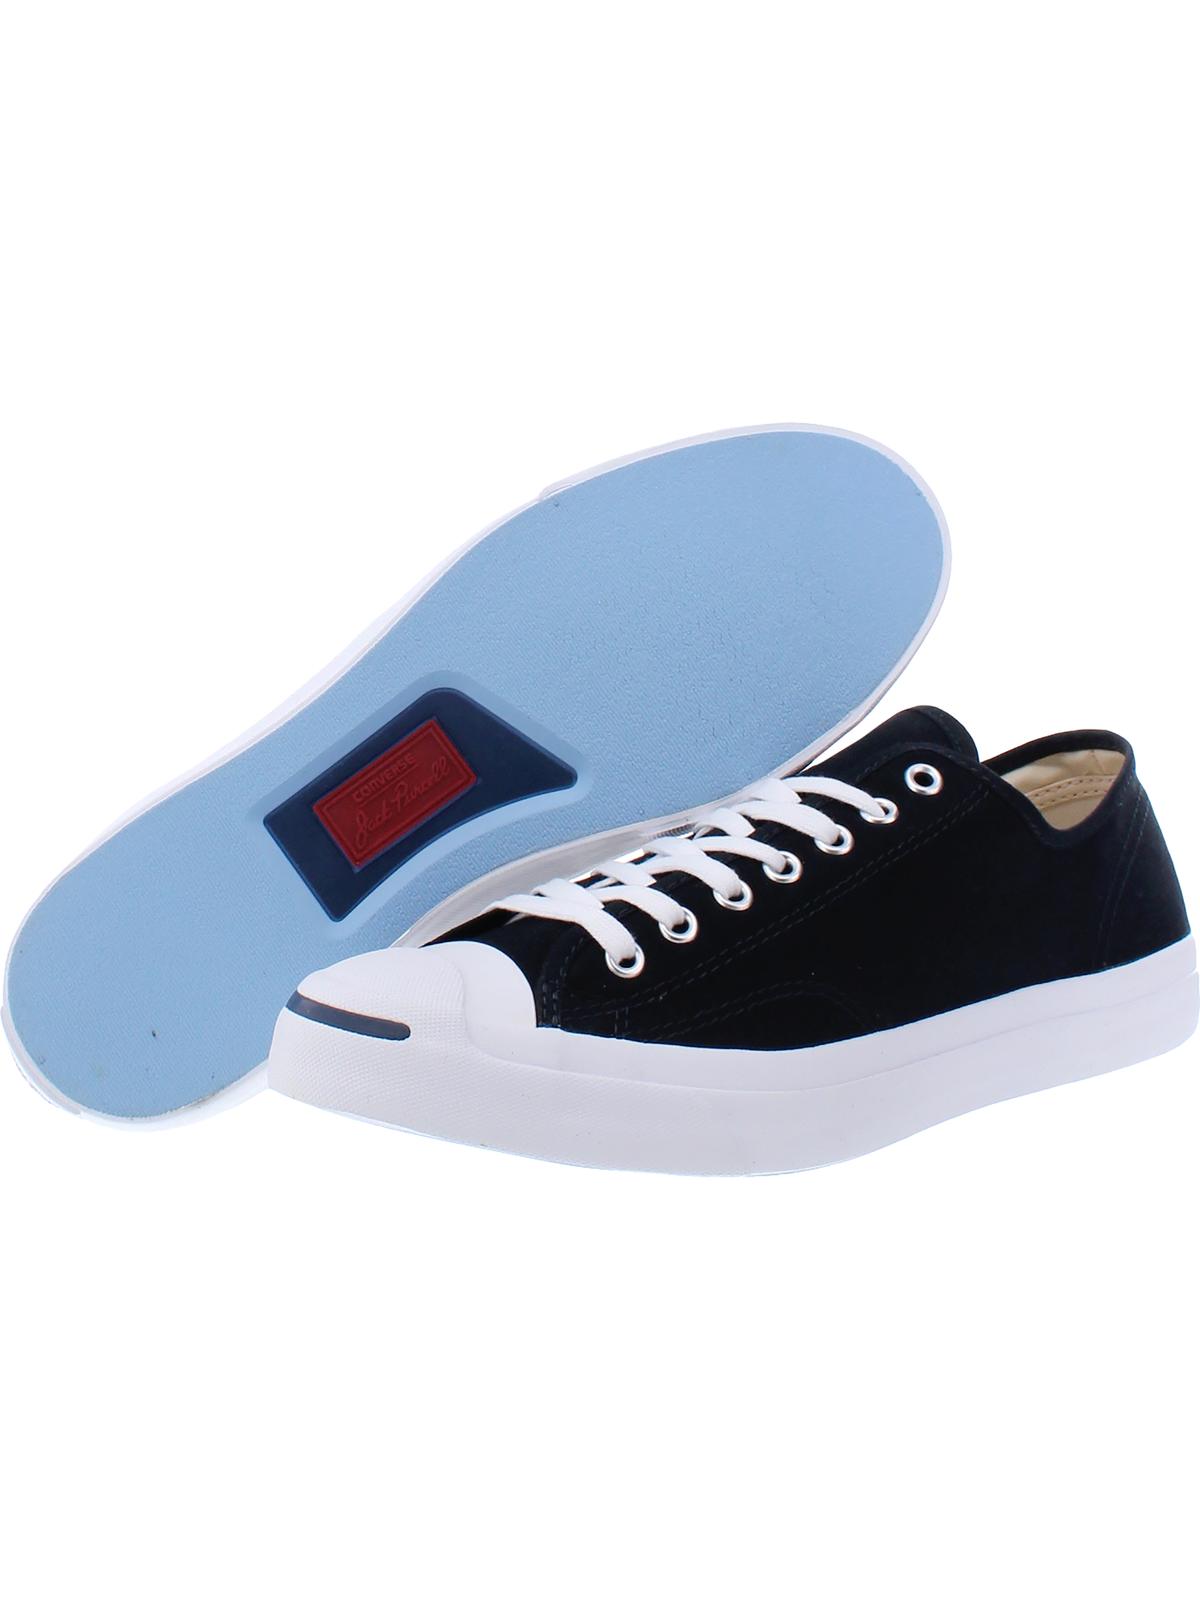 Converse Mens Jack Purcell Canvas Canvas Low Top Fashion Sneakers - image 2 of 3